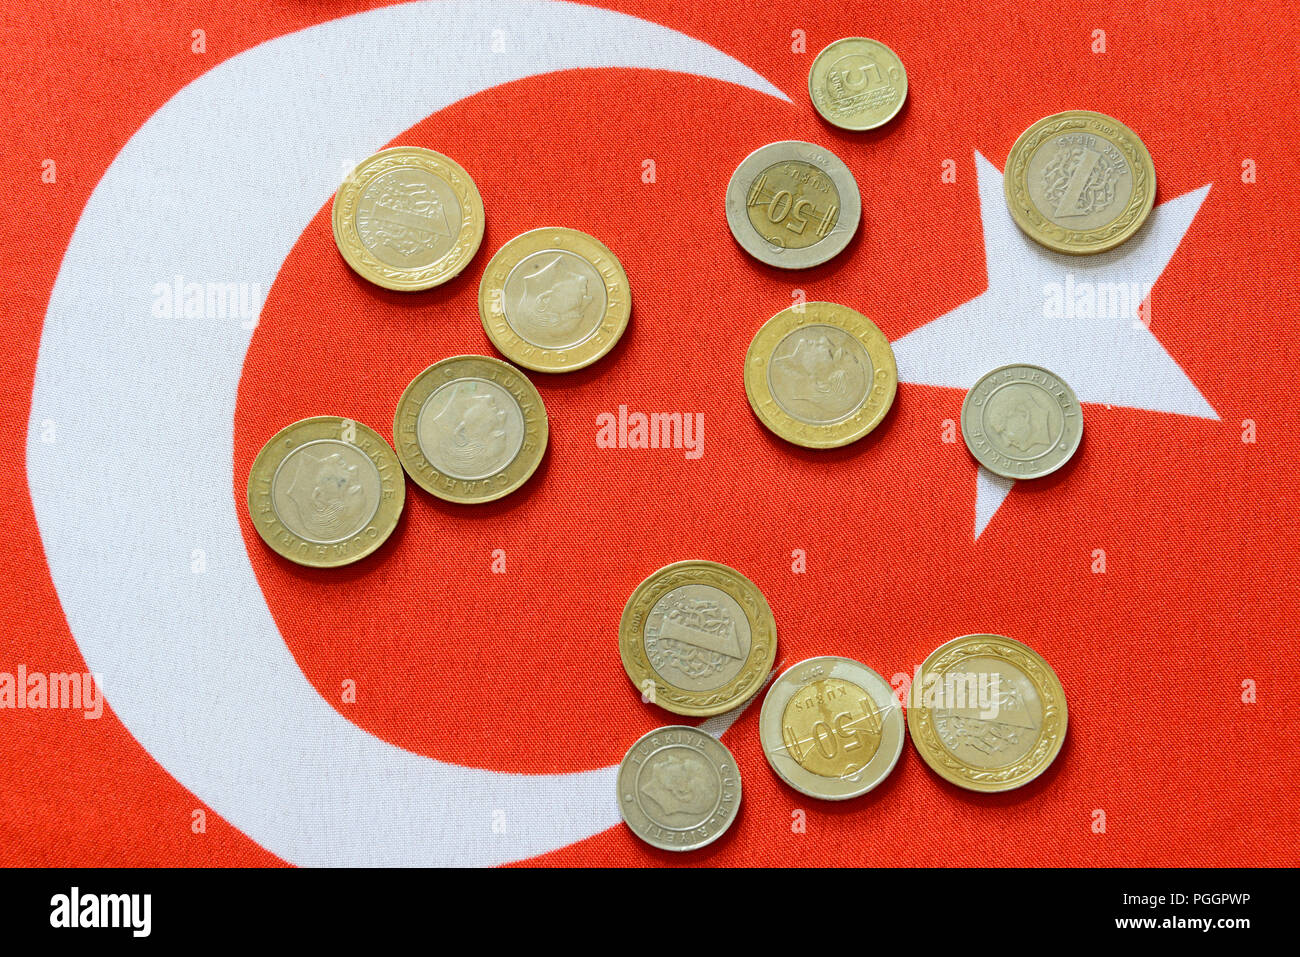 Turkish Lira bills and coins on turkish flag. The Turkish Lira is the national currency of Turkey Stock Photo